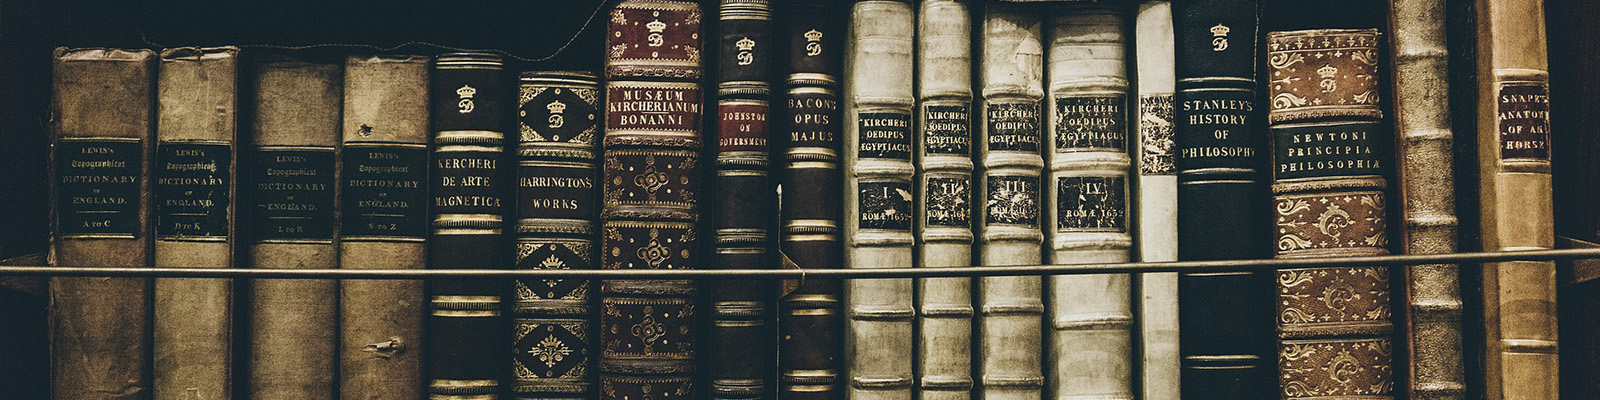 Antique books on a library shelf